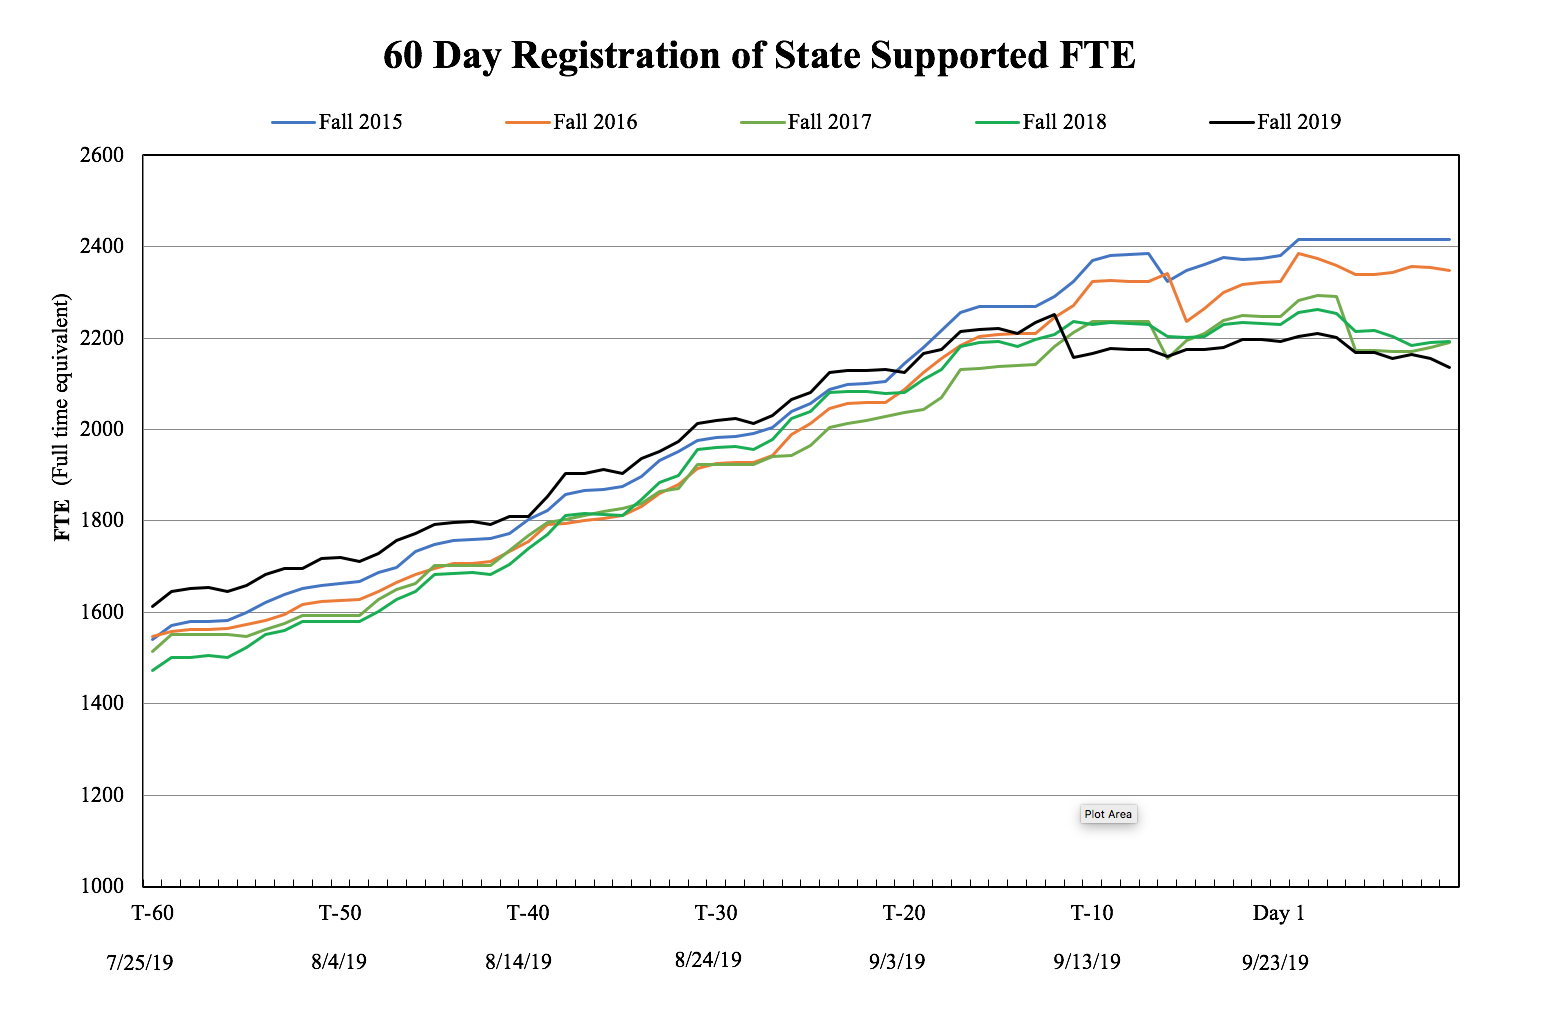 60 day registration history for fall 2019